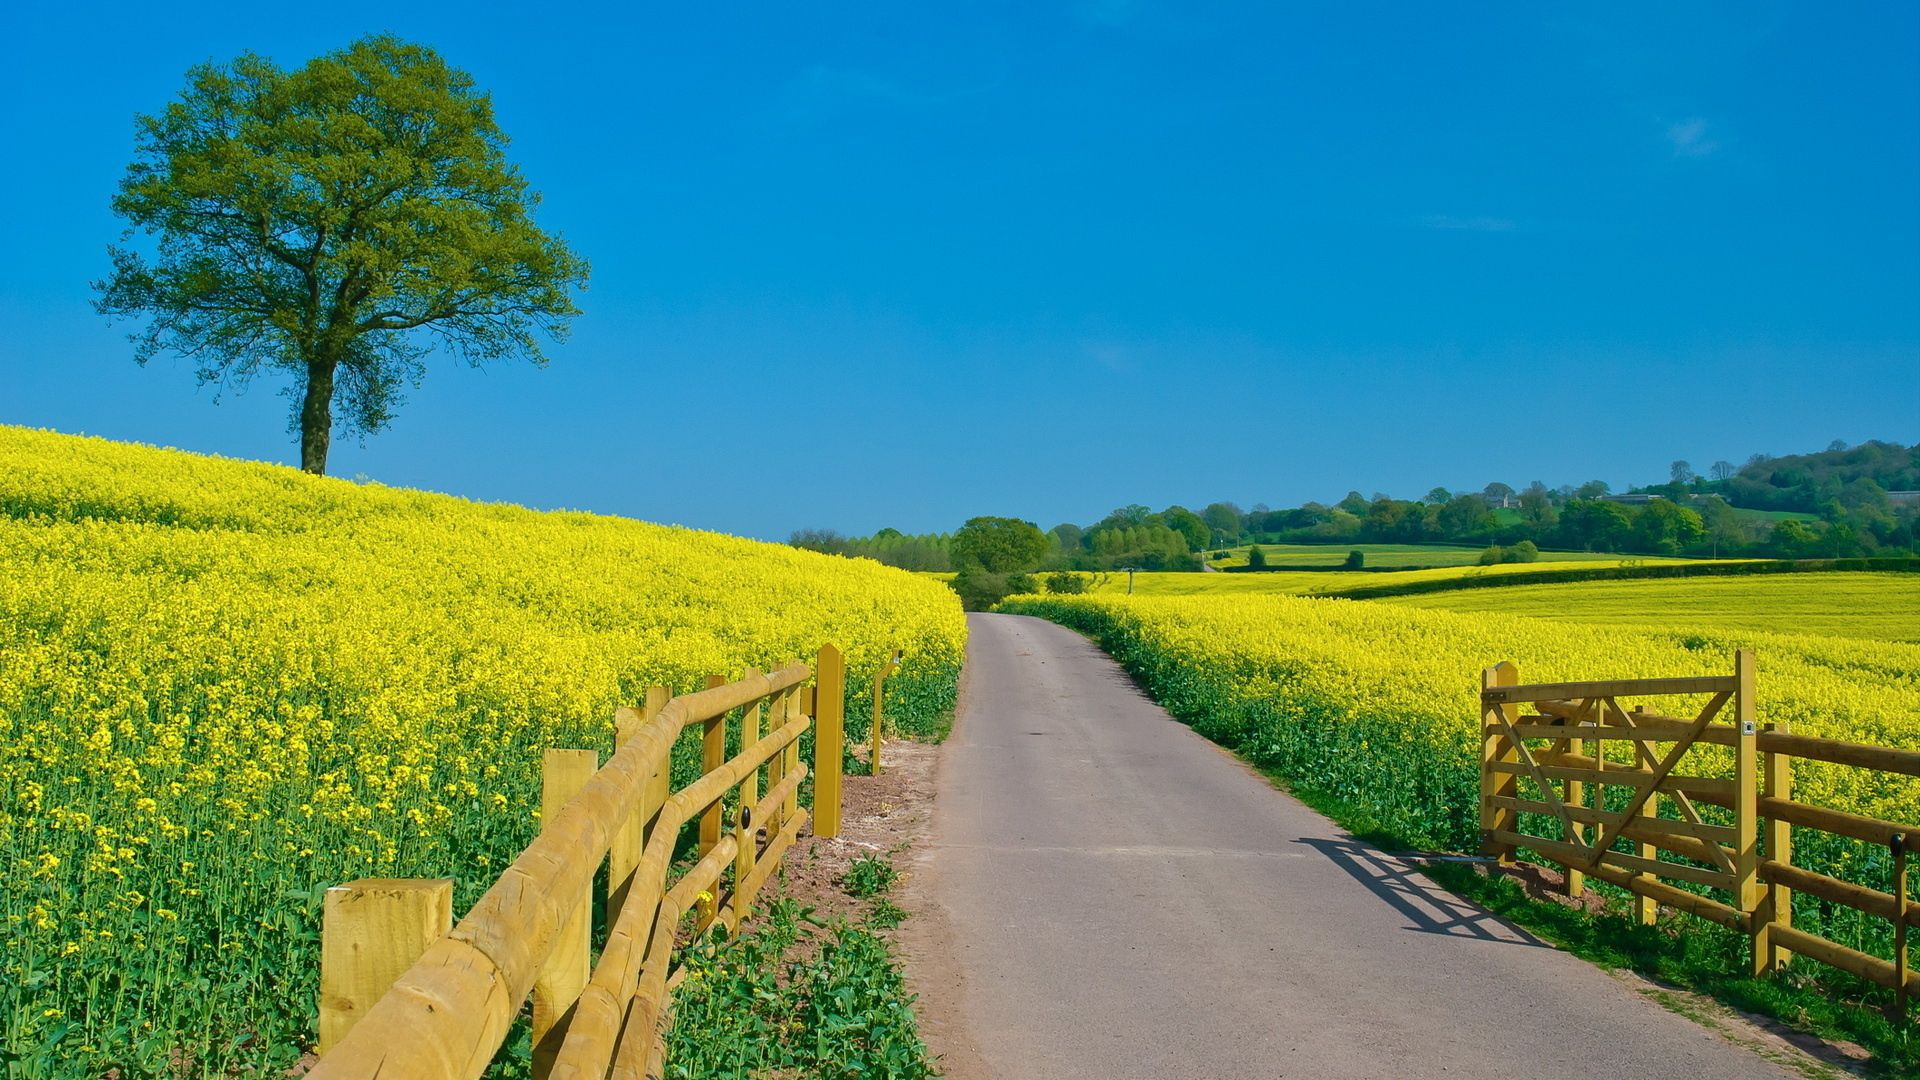 road, summer, nature, flowers, open spaces, expanse, slopes, yellow, fencing, enclosure, day